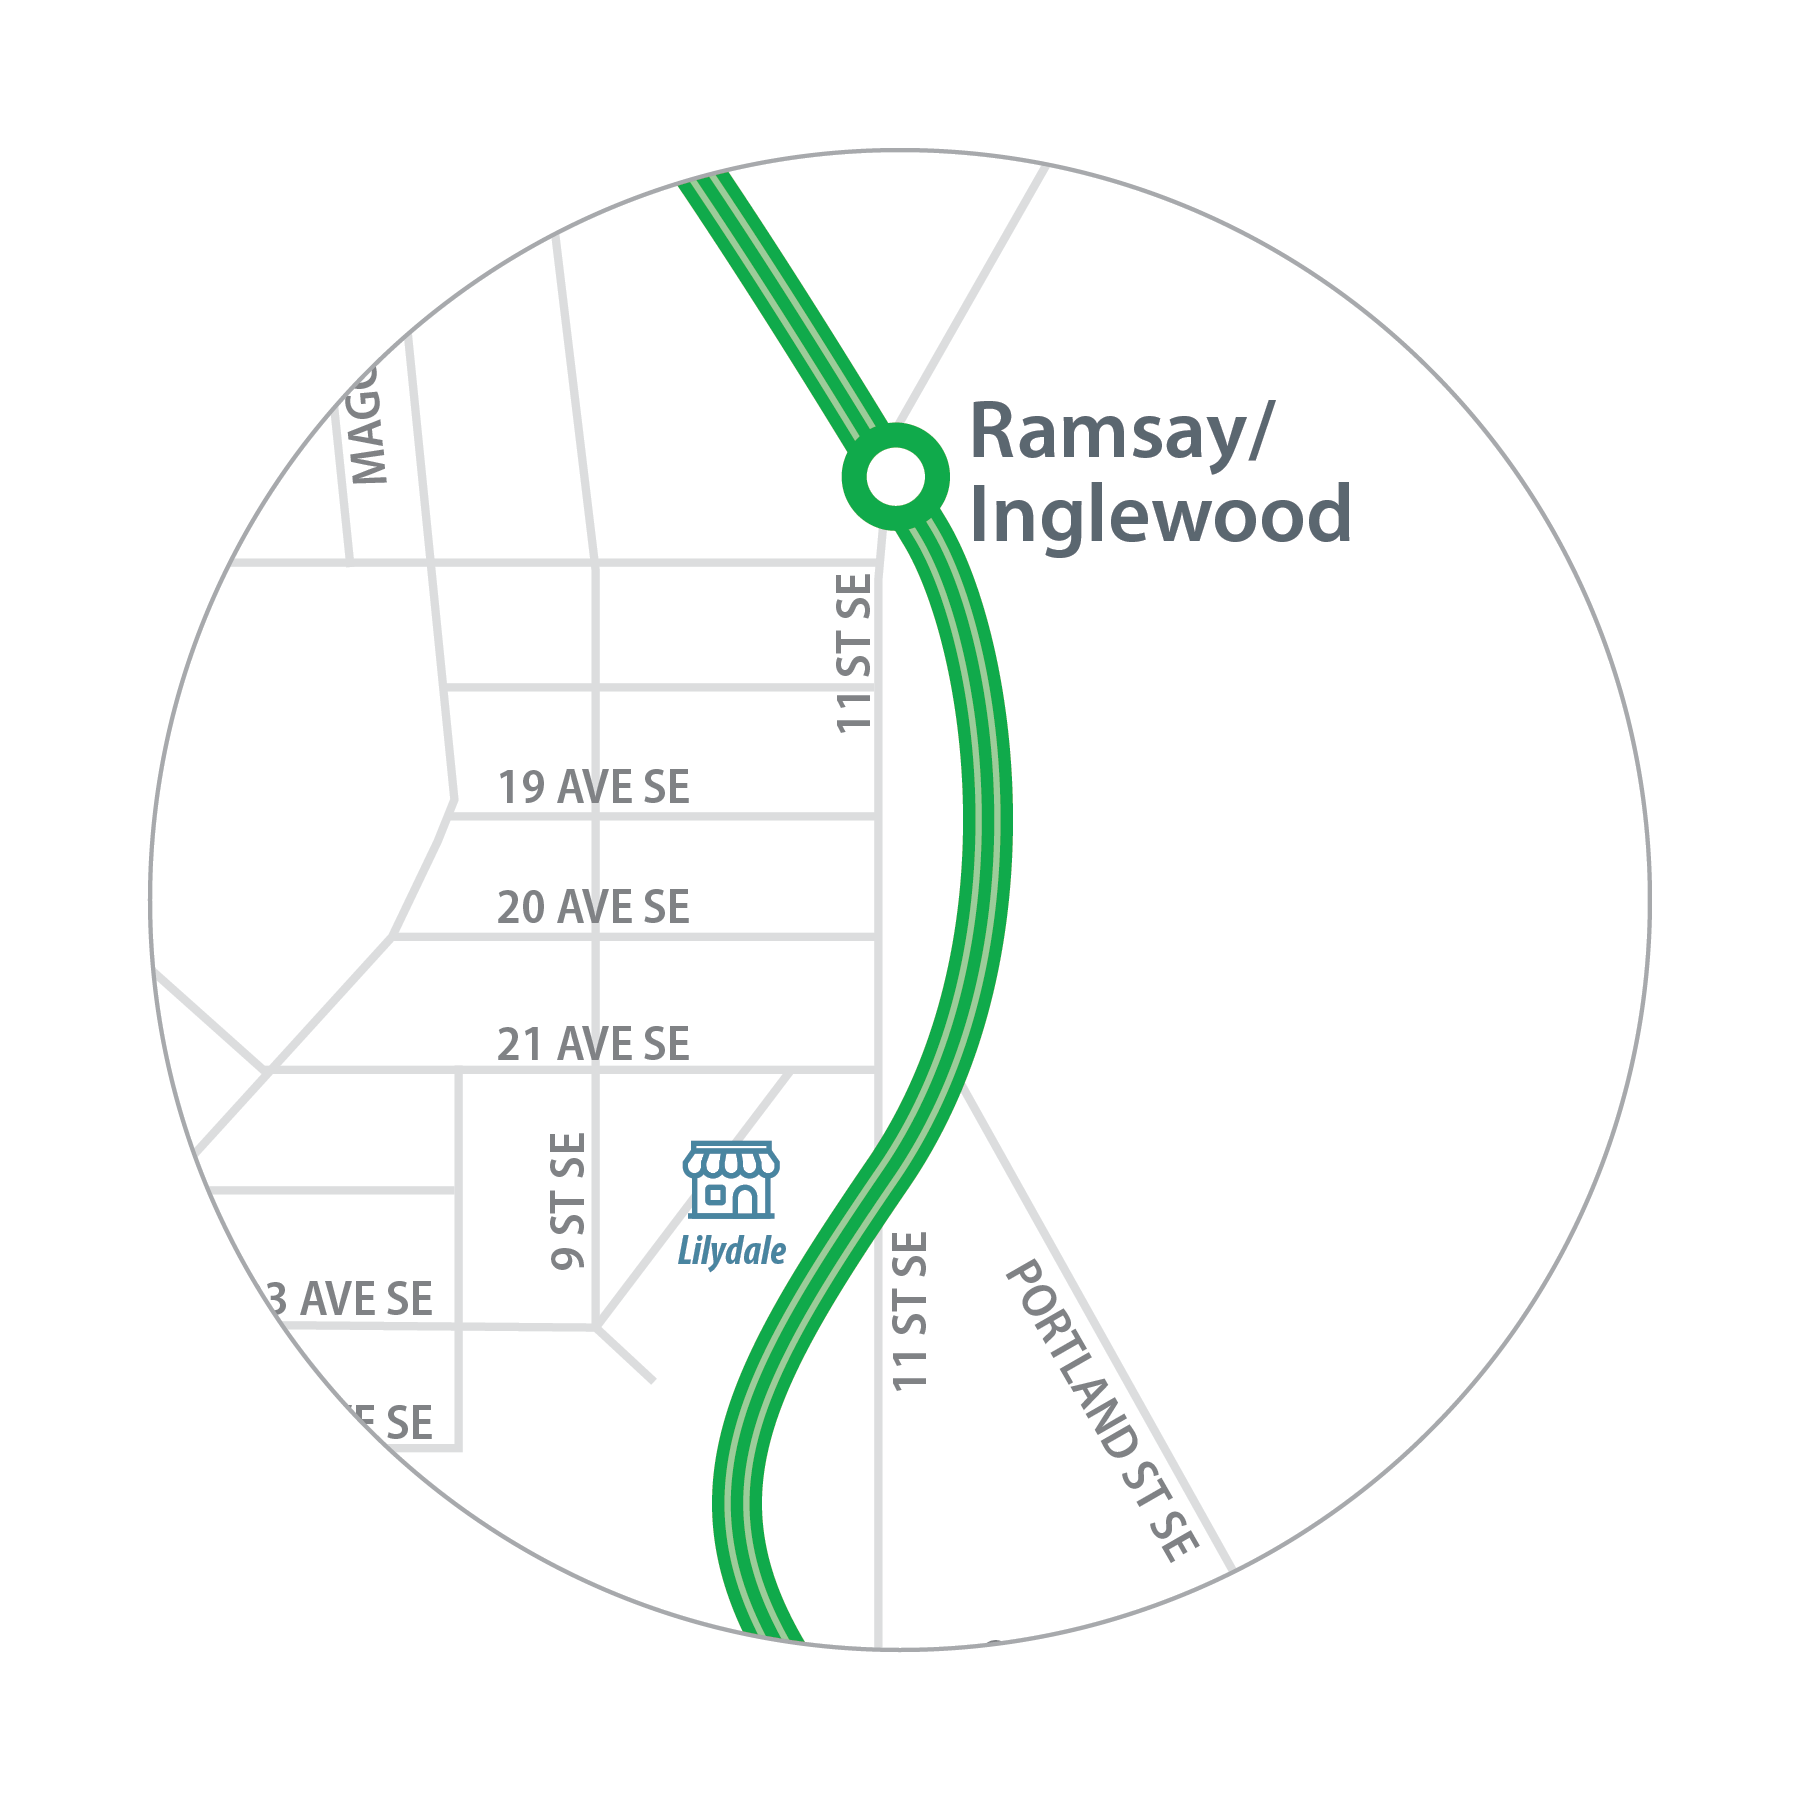 Map showing Lilydale in relation to Ramsay/Inglewood Station